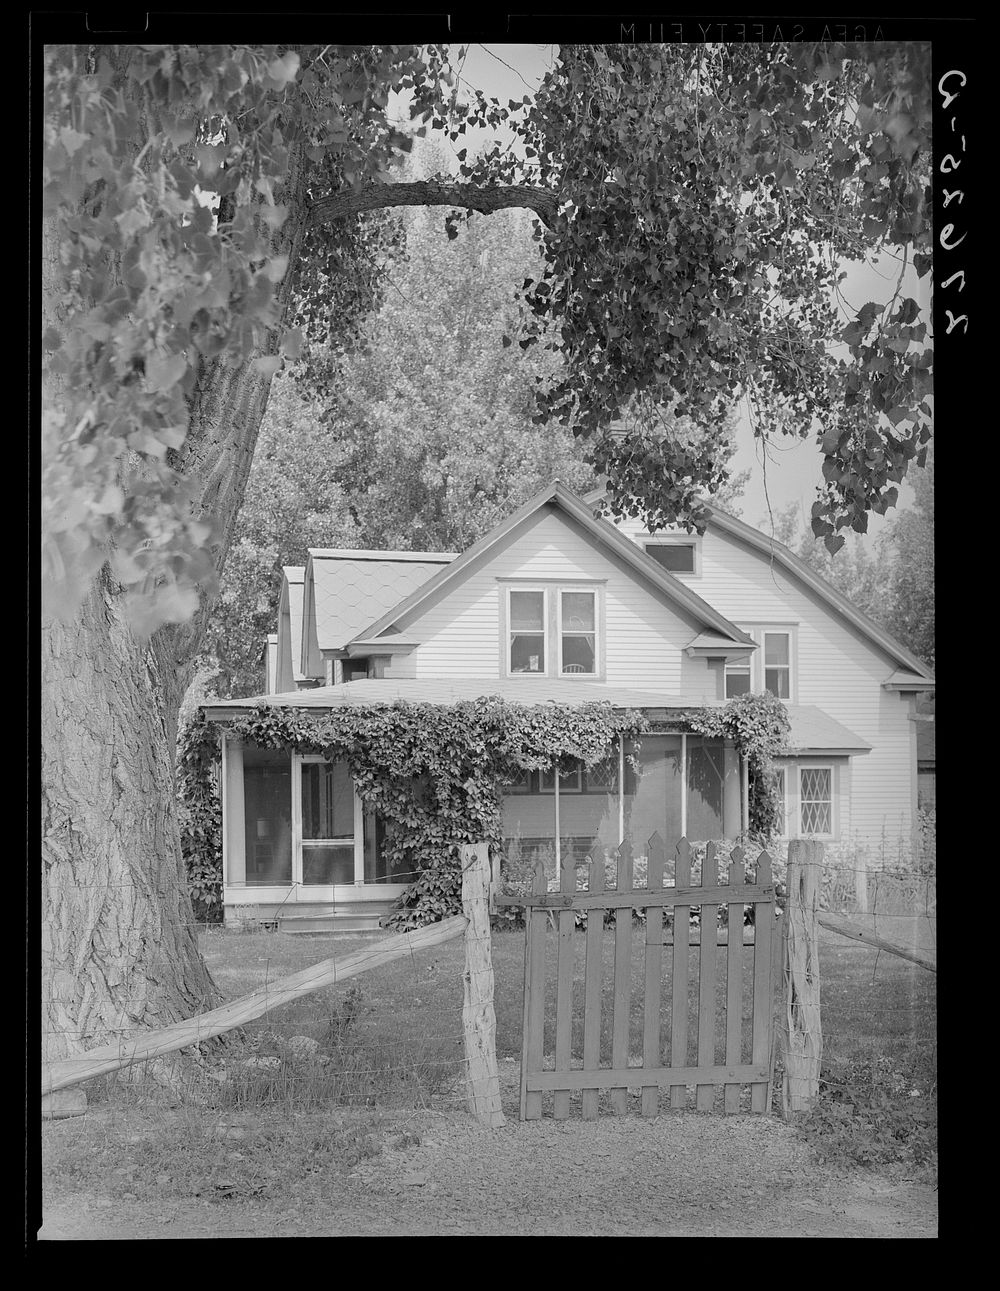 Ranch house. Quarter Circle 'U' Ranch, Montana. Sourced from the Library of Congress.